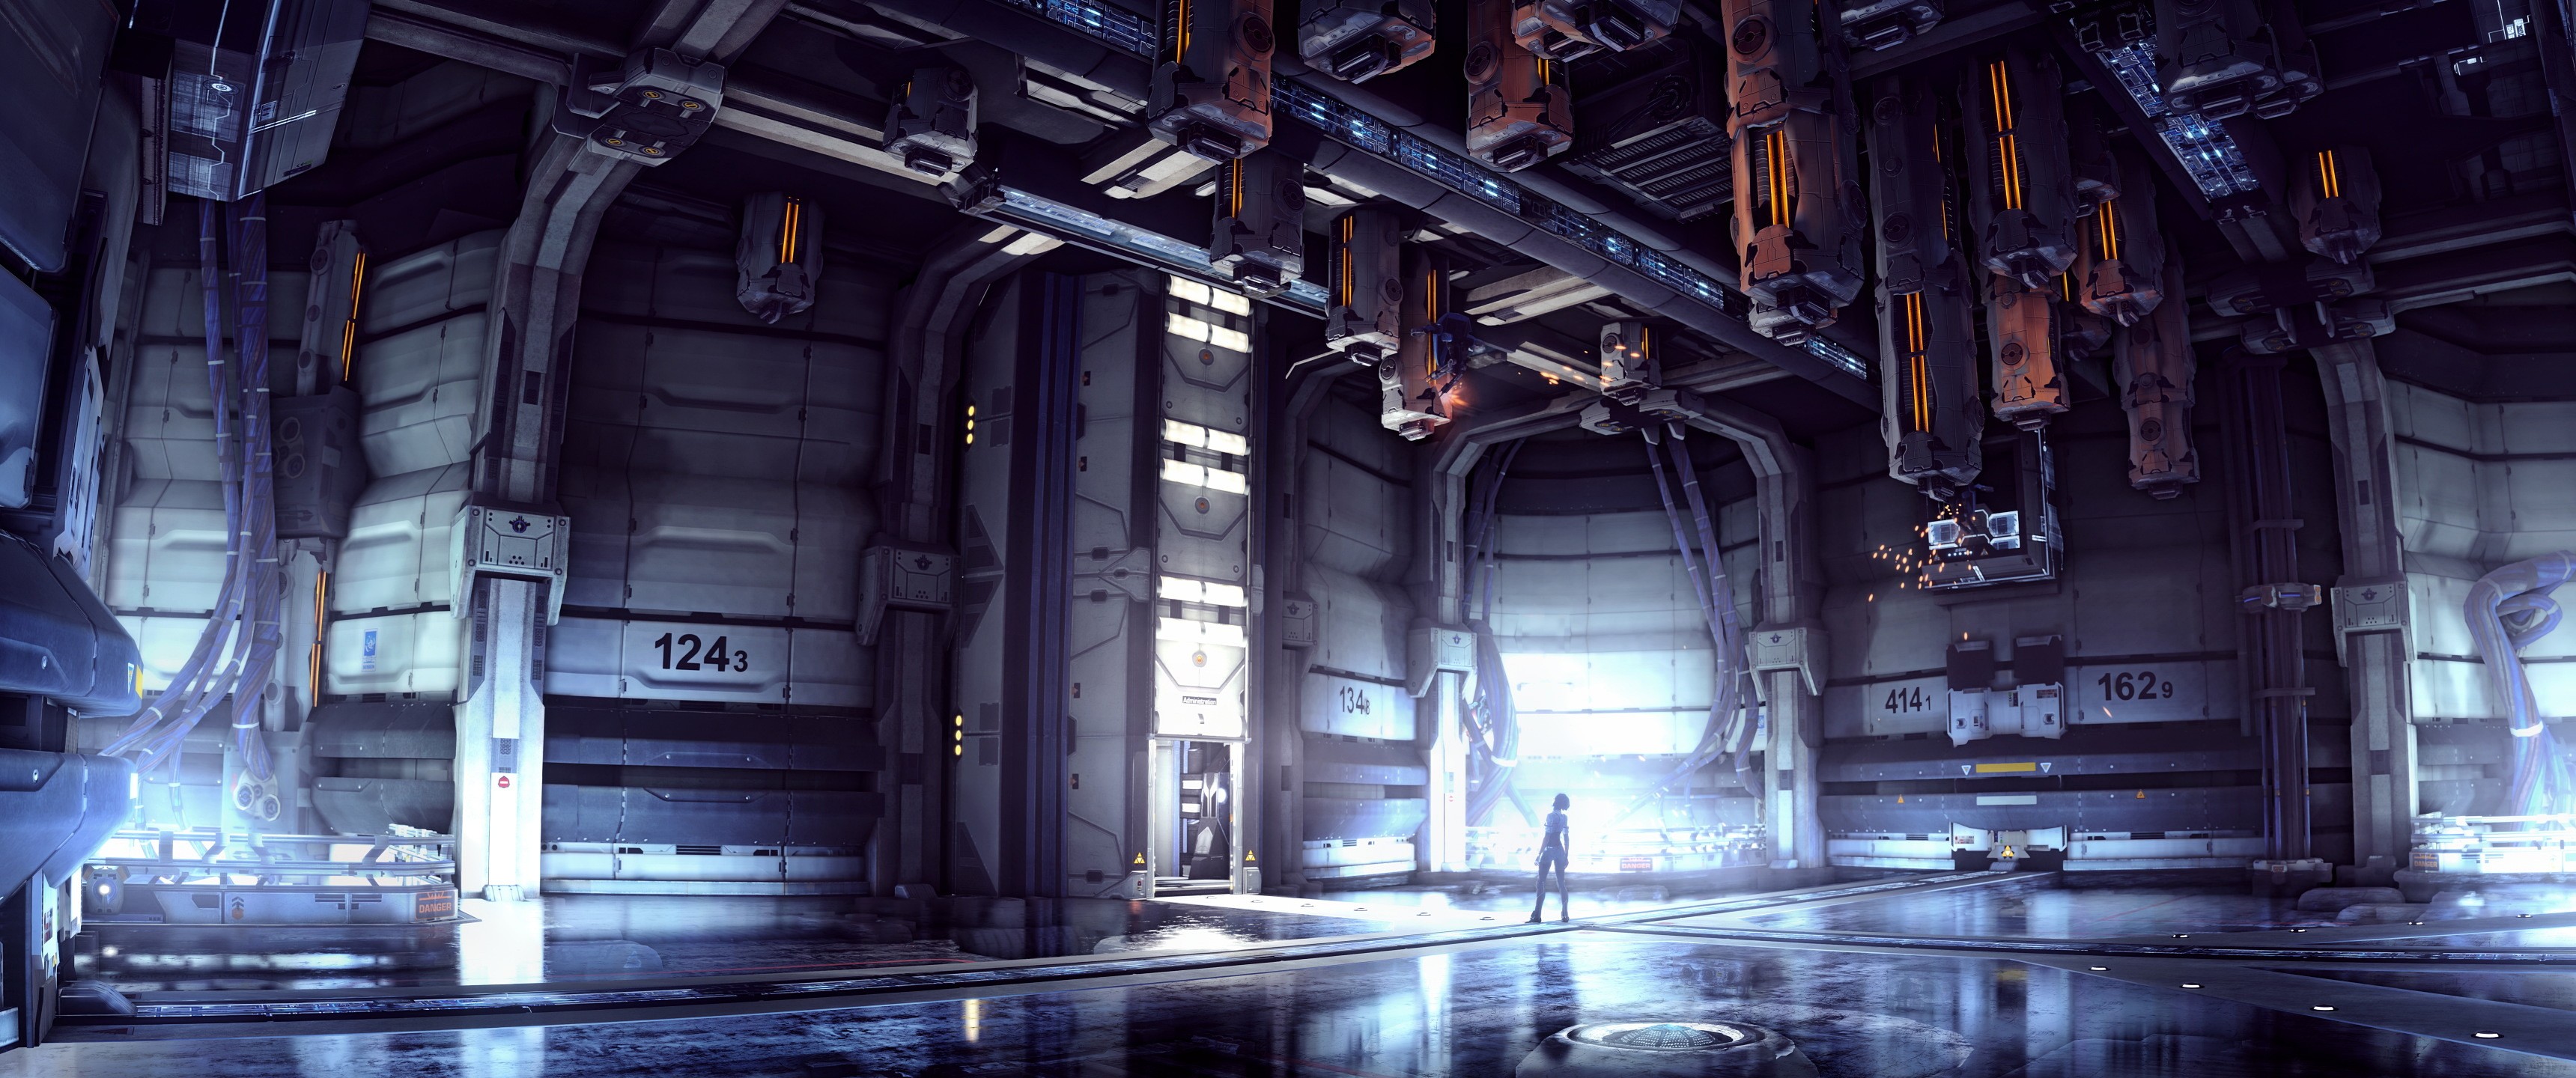 General 3440x1440 science fiction Remember Me video game art video games PC gaming futuristic